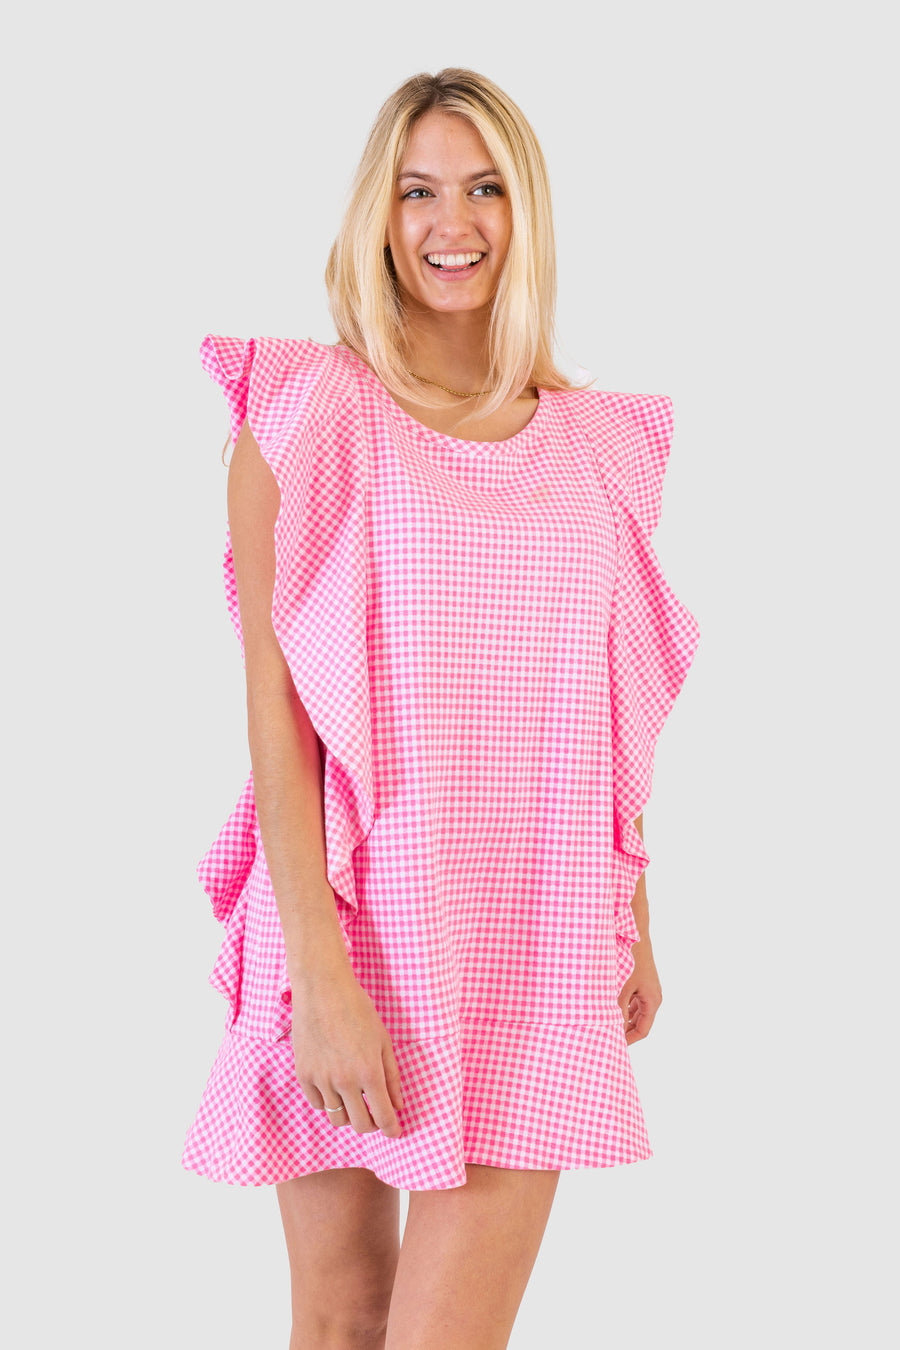 Noah Dress Hot Pink Gingham *Limited*Edition*